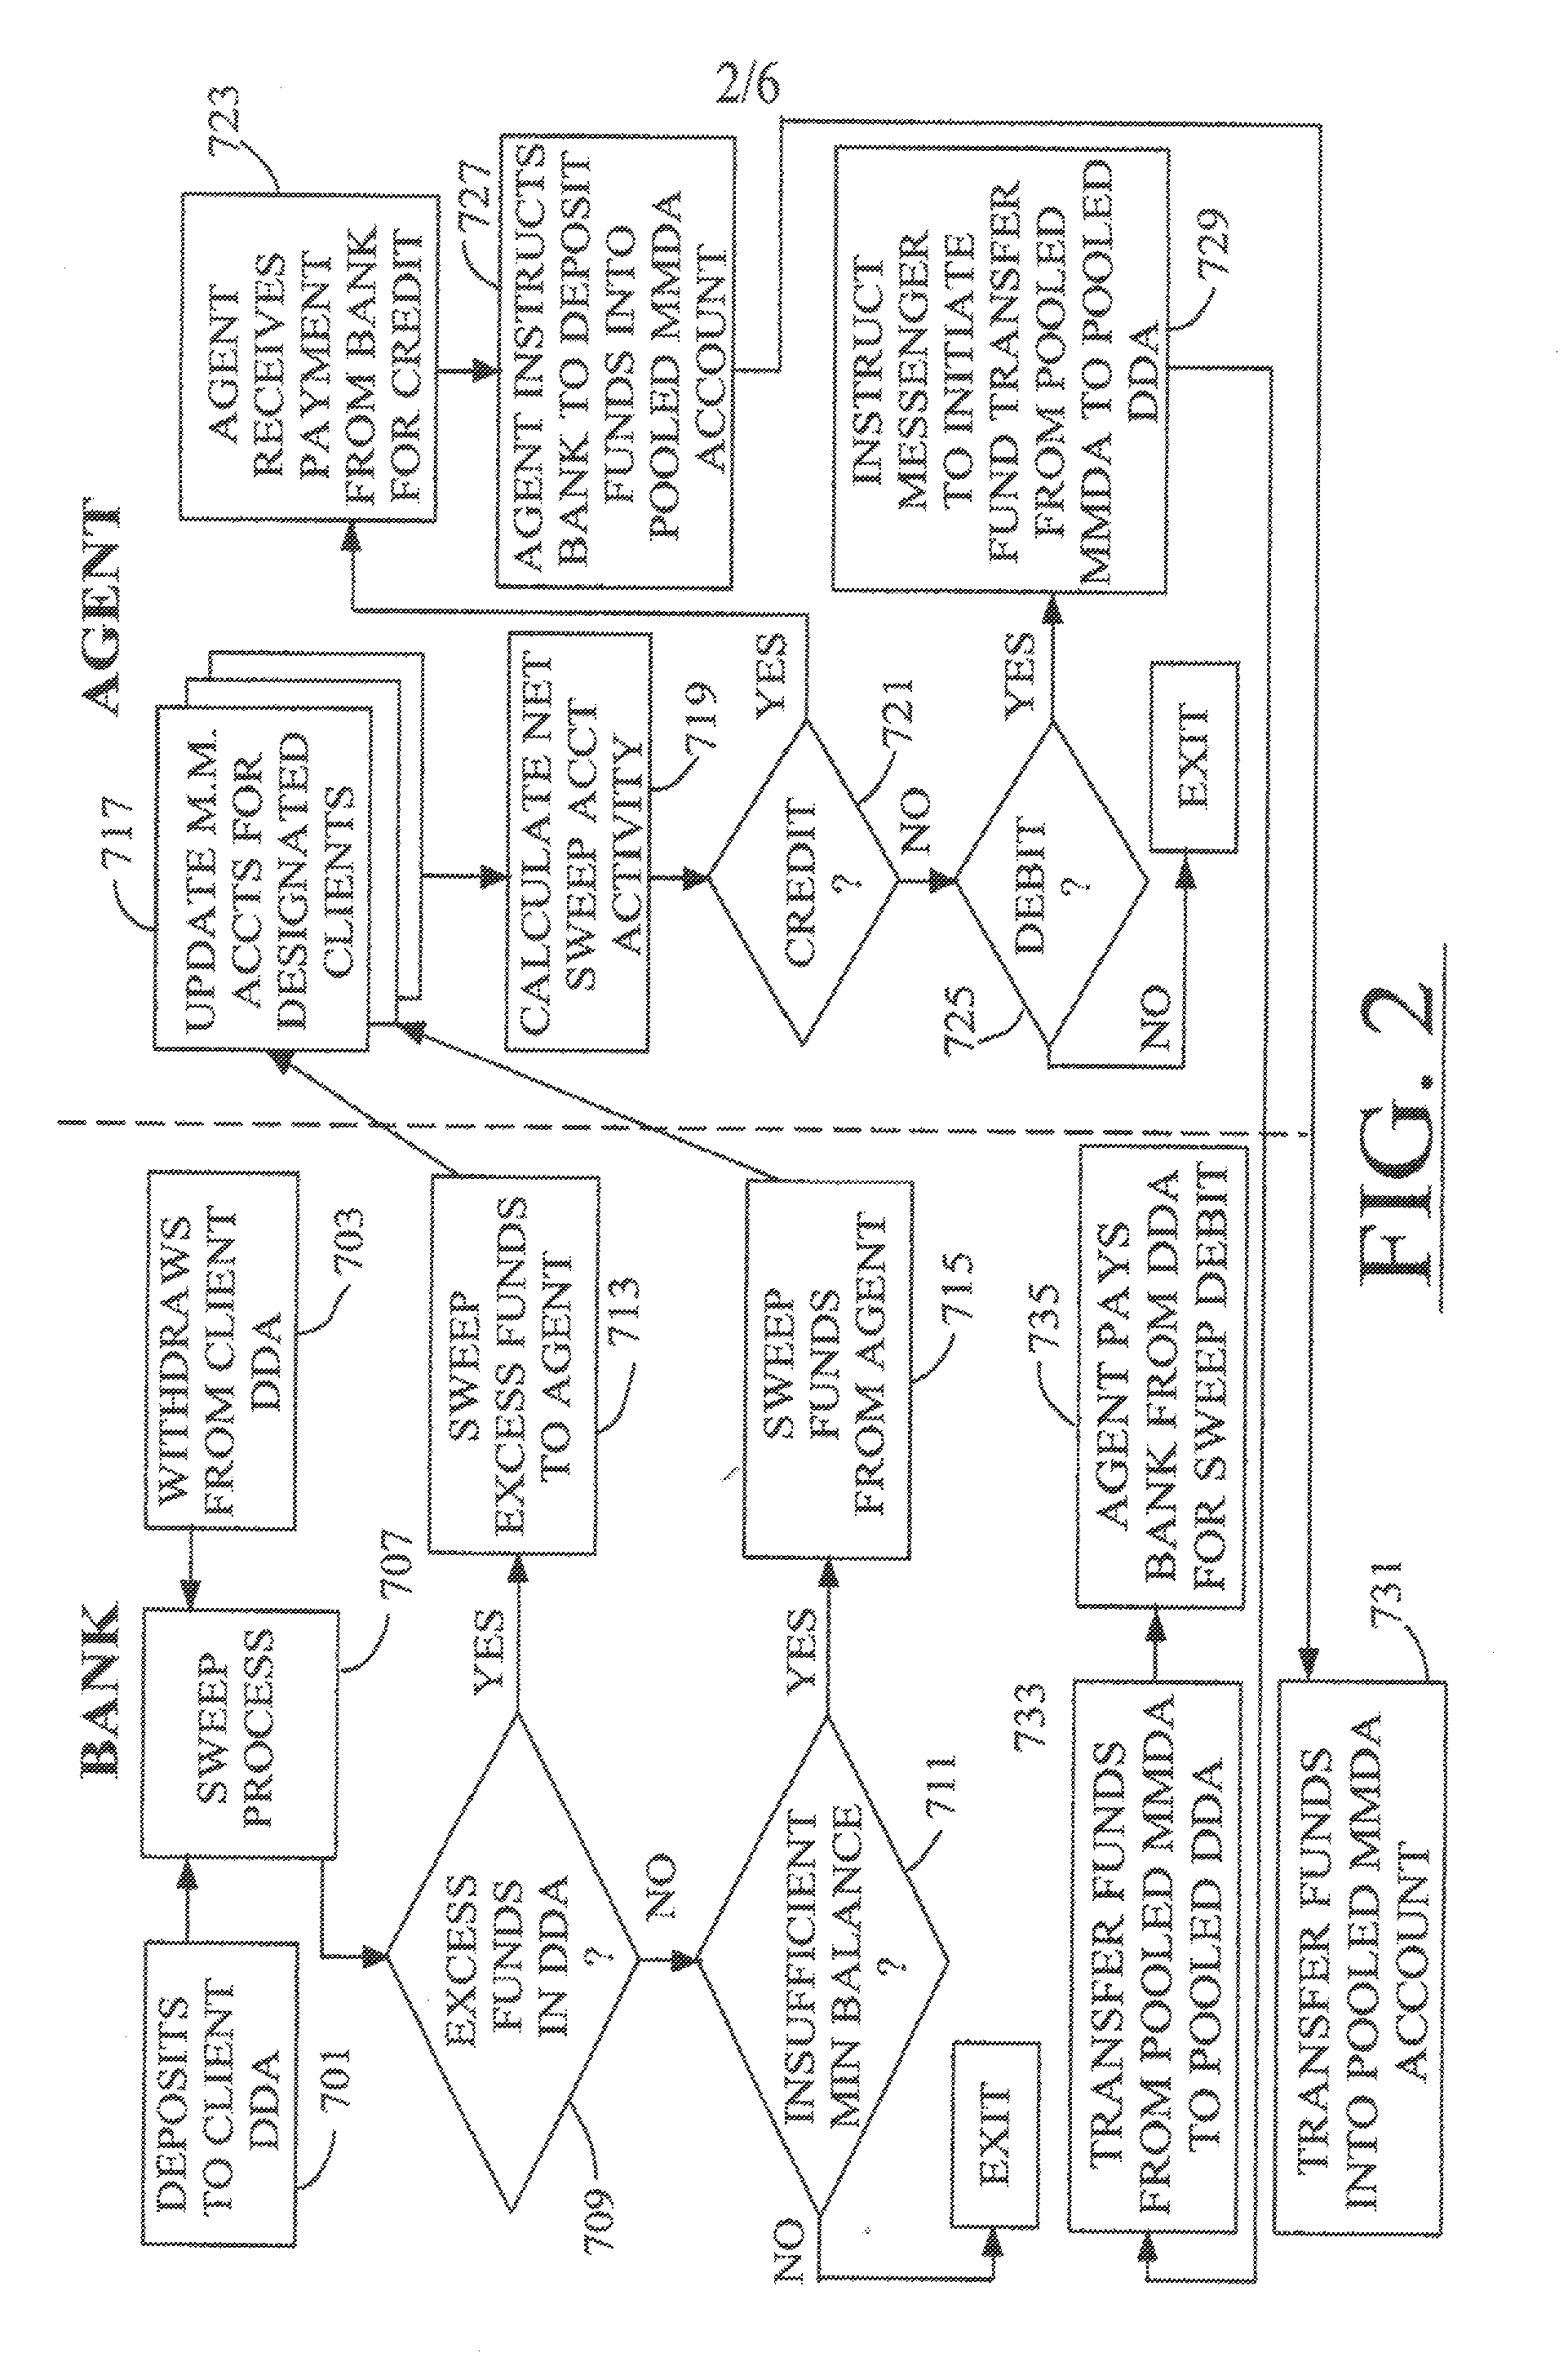 Systems and methods for adminstering return sweep accounts